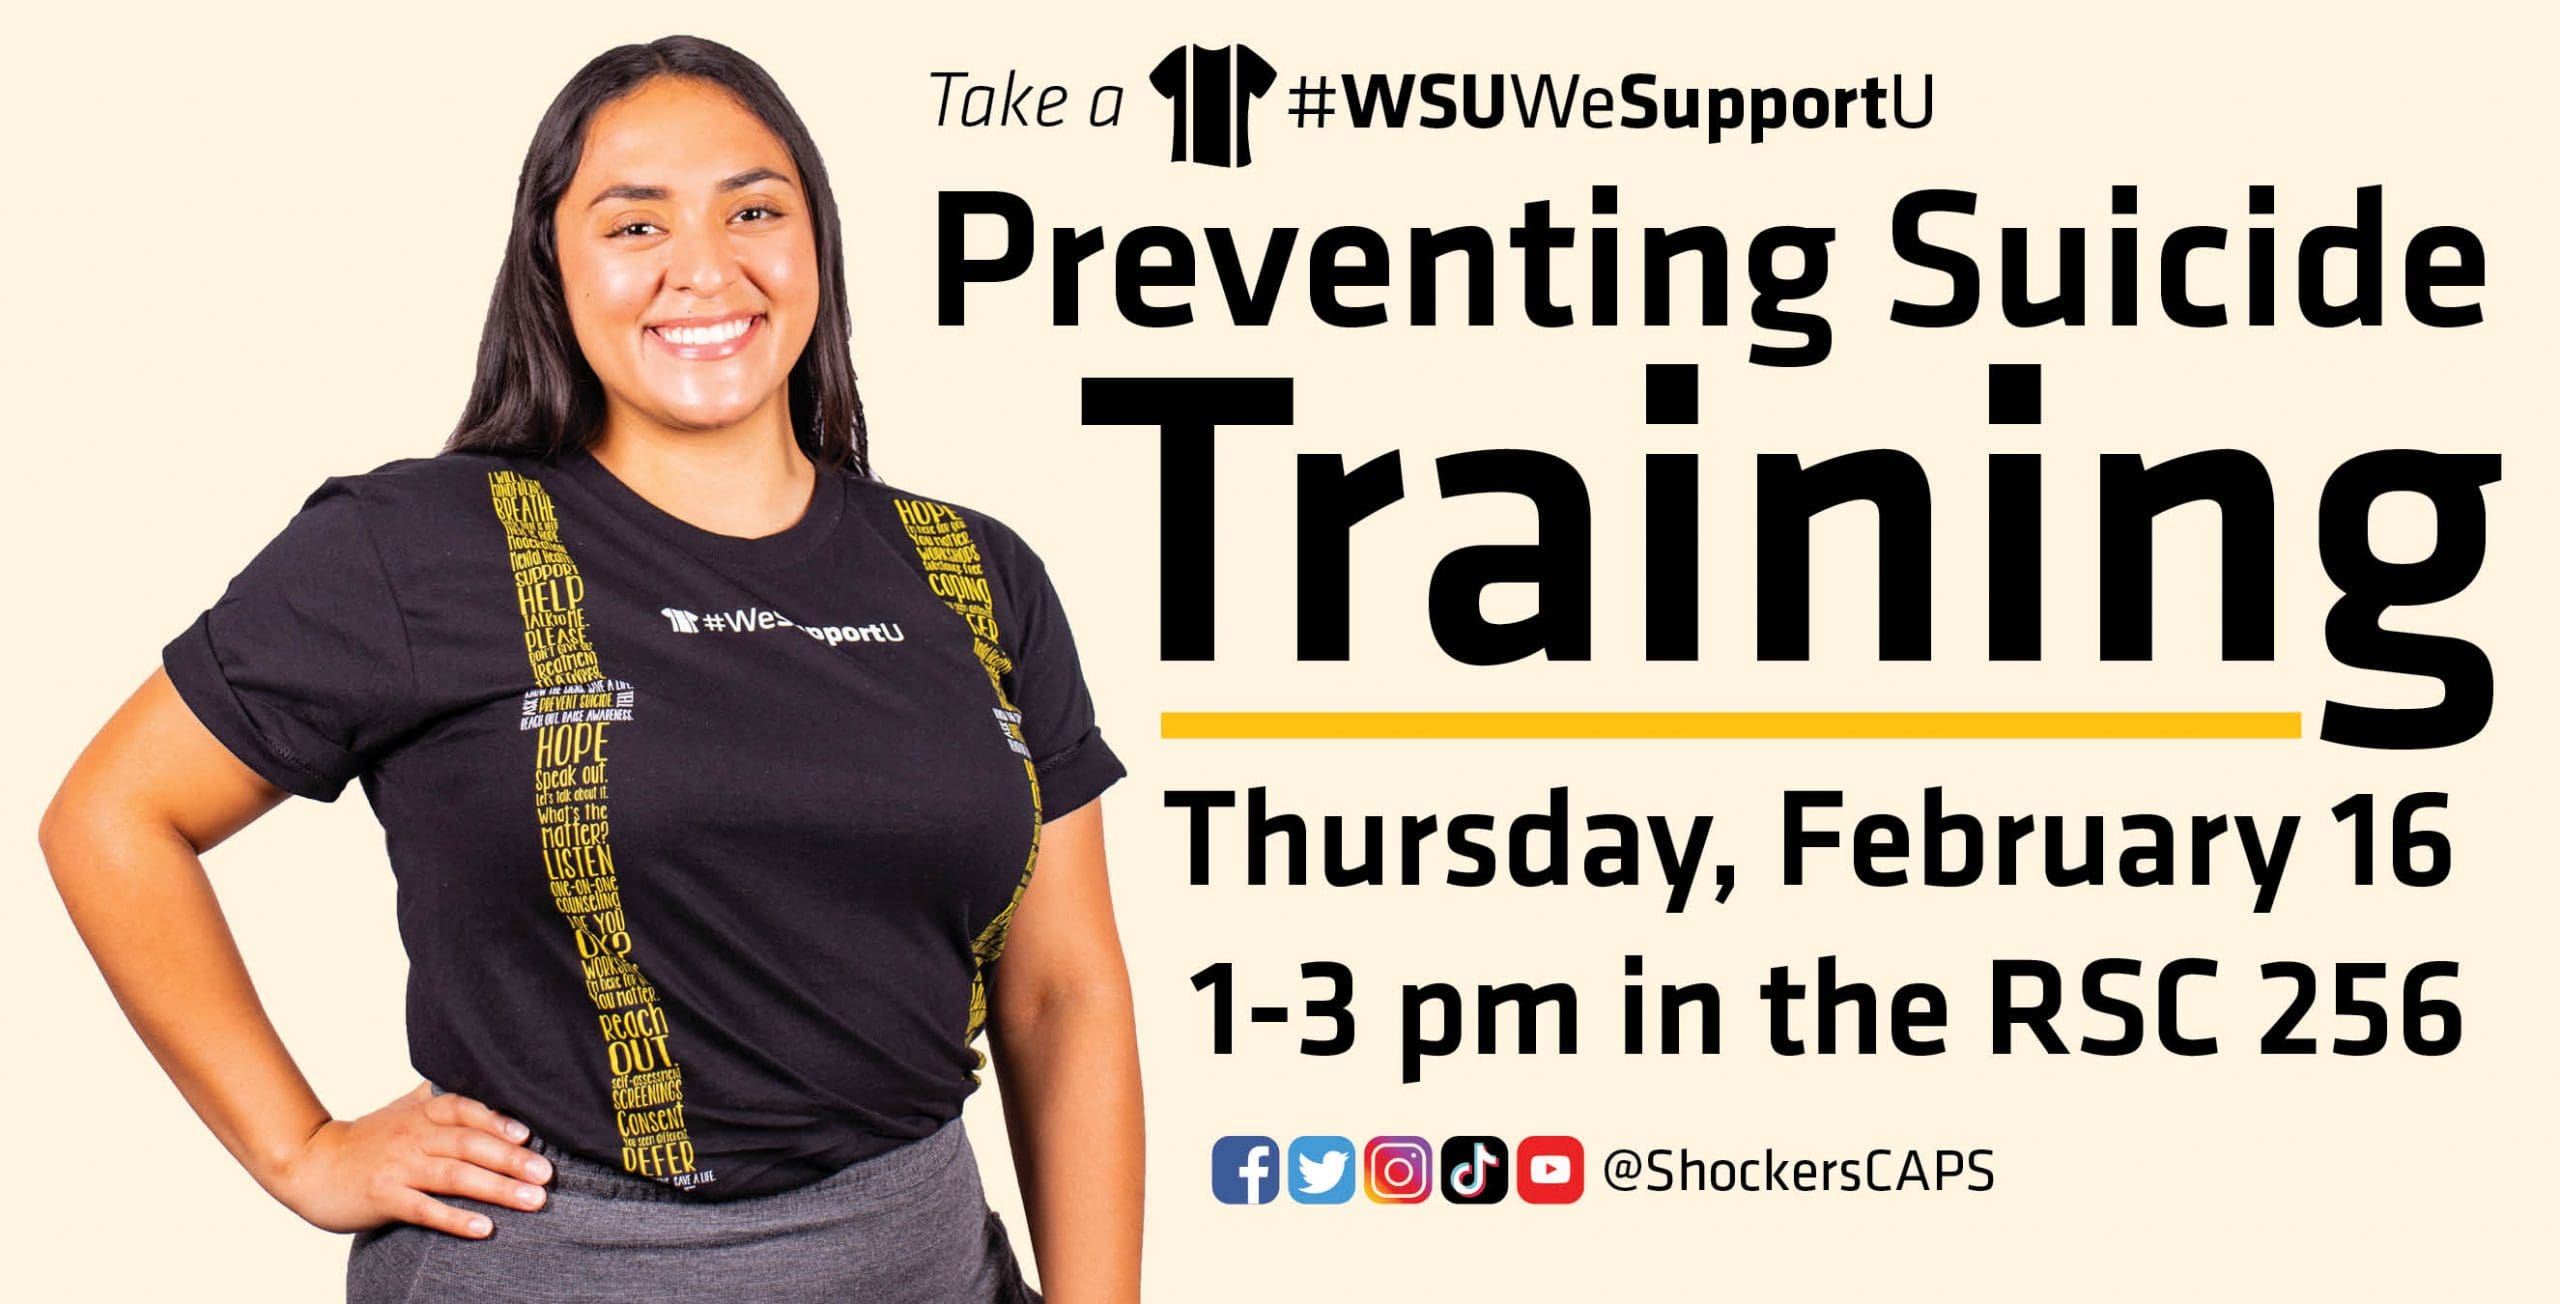 A photo of a woman with the Suspenders4Hope shirt with the text, "Take a #WSUWeSupportU Preventing Suicide Training at 1-3 p.m. Thursday, Feb. 16 in 256 Rhatigan Student Center."